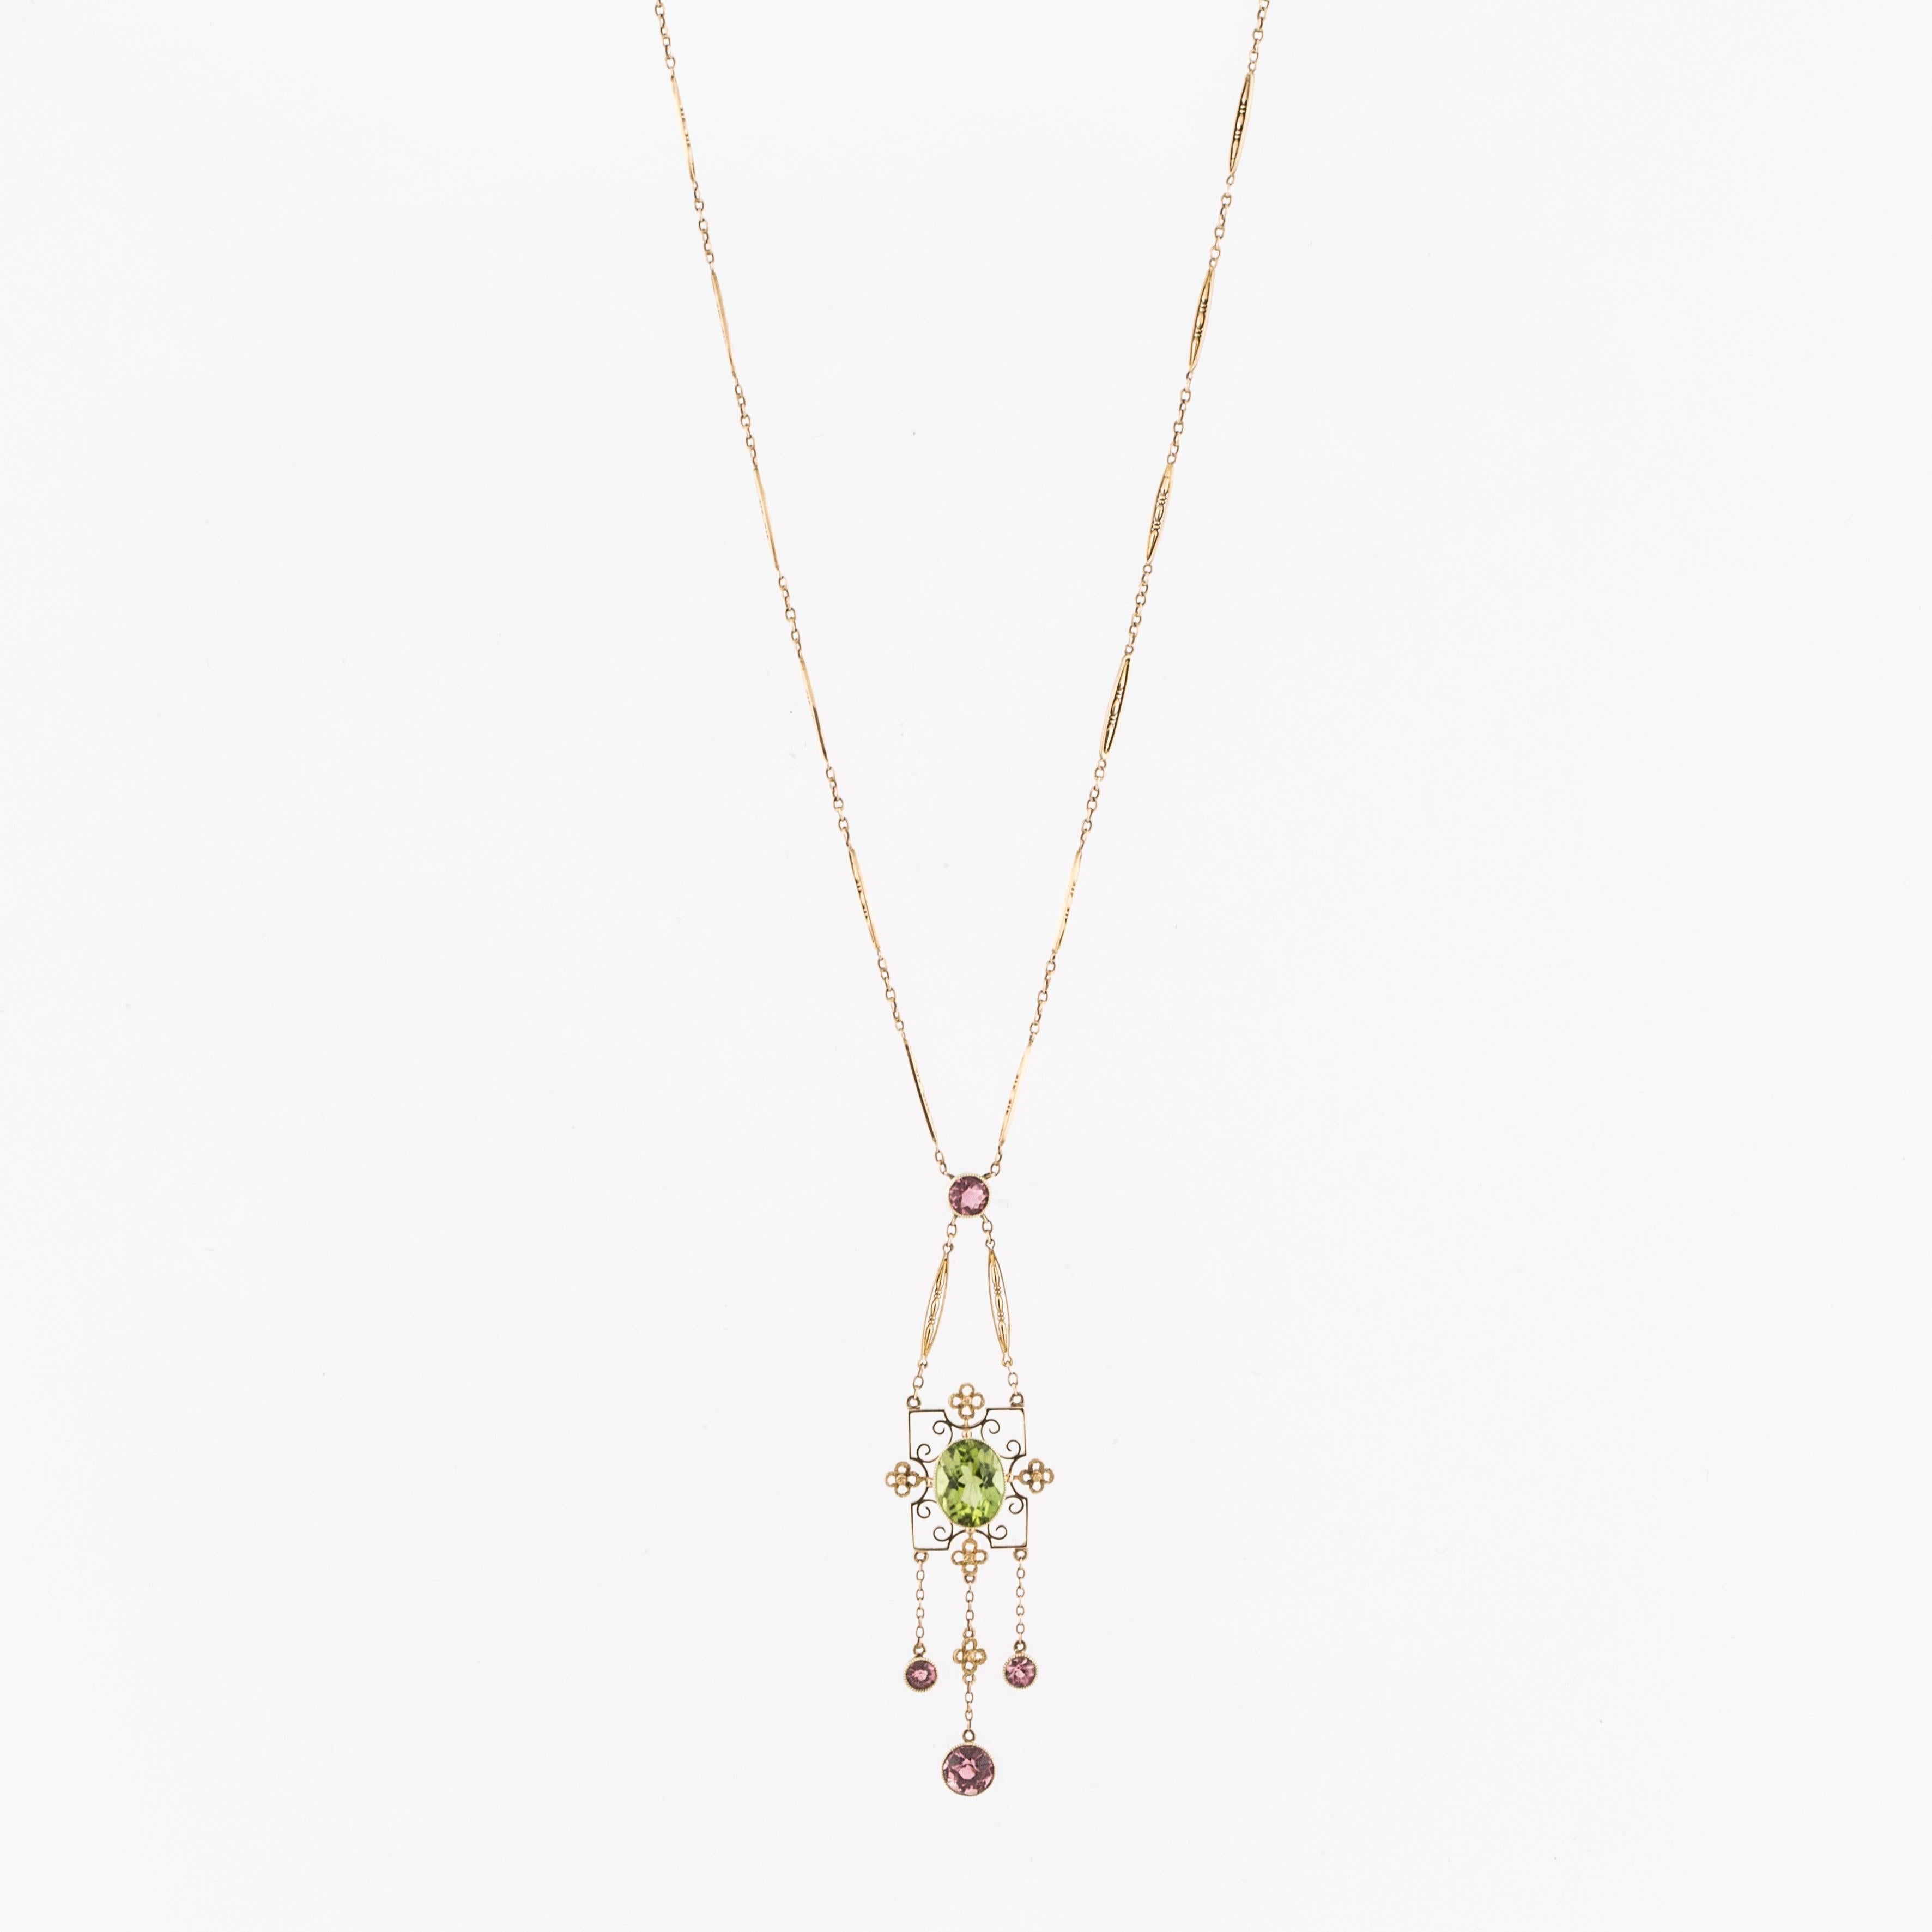 Gorgeous yellow gold lavalier set in 15K.  Features an oval peridot and pink tourmalines.  Necklace measures 22